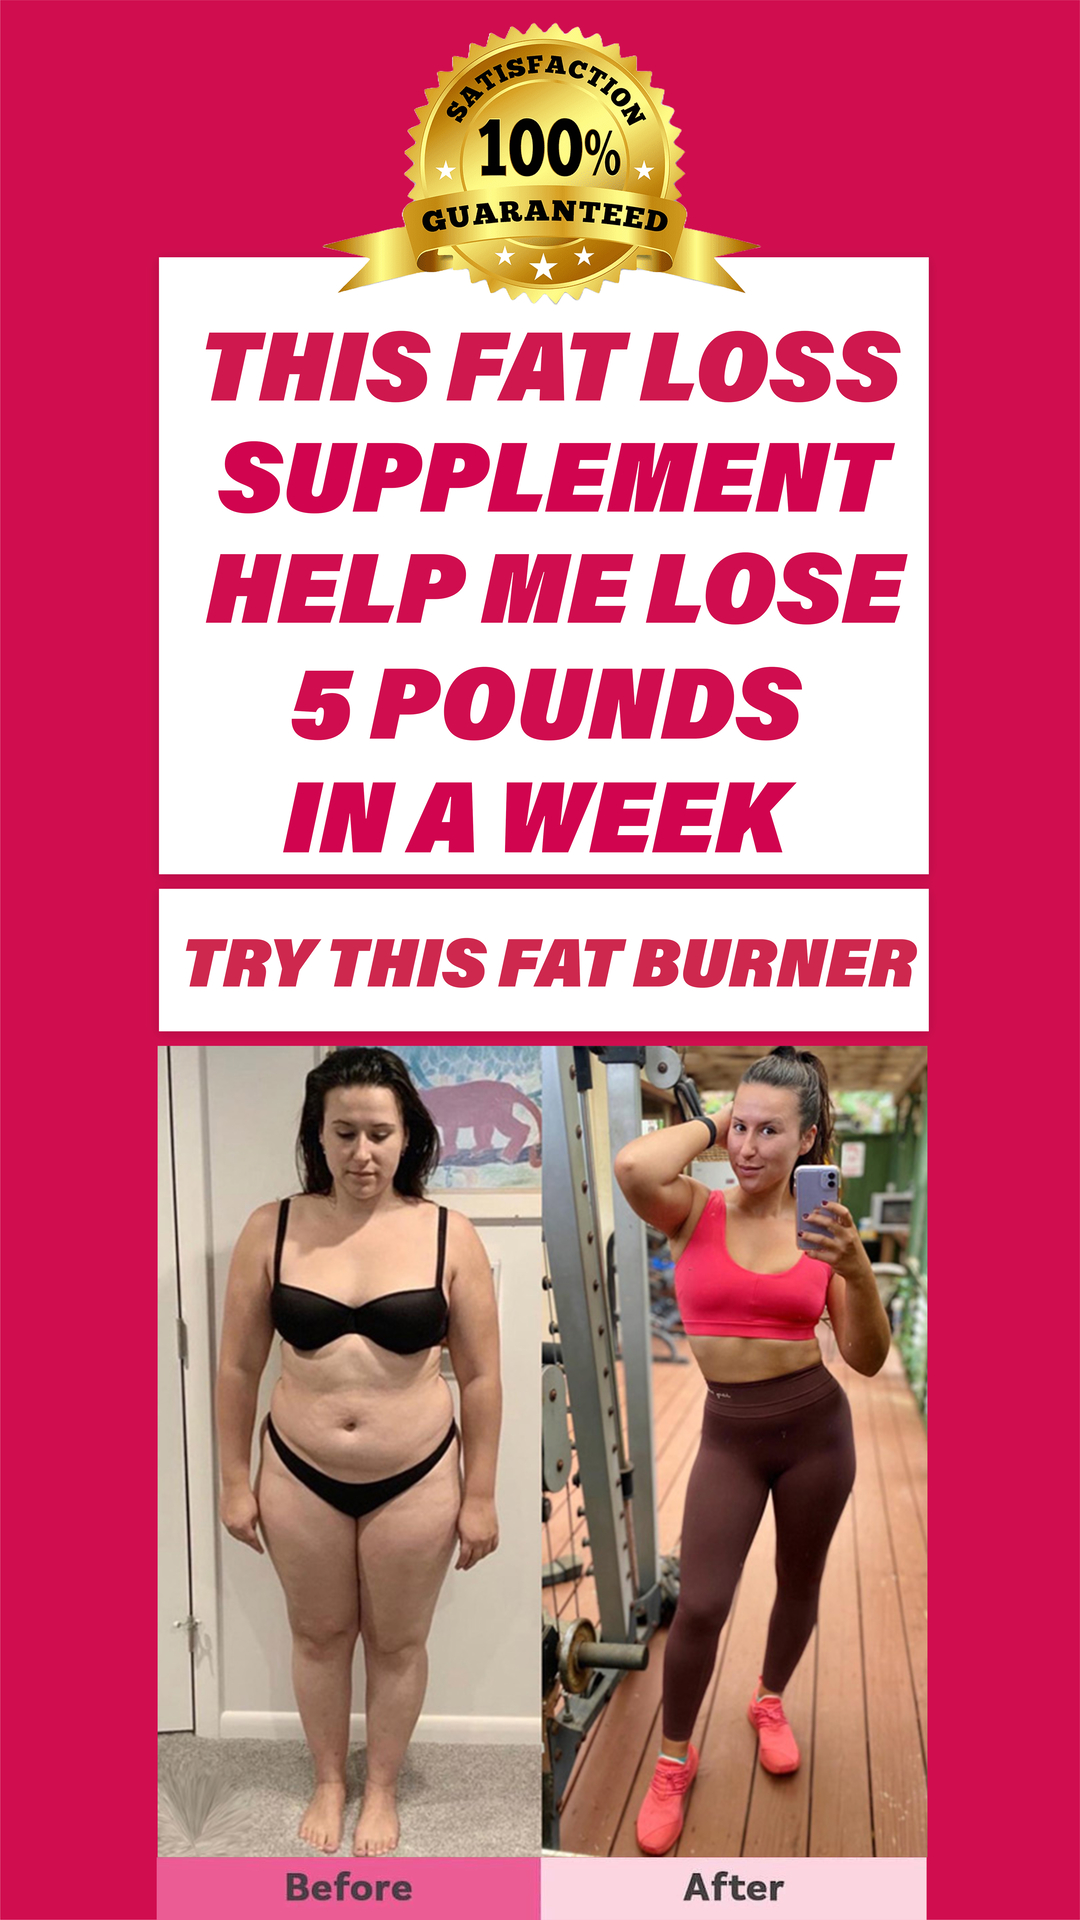 Best Fat Burner Supplements for Women to Lose 5 Pounds in a Week